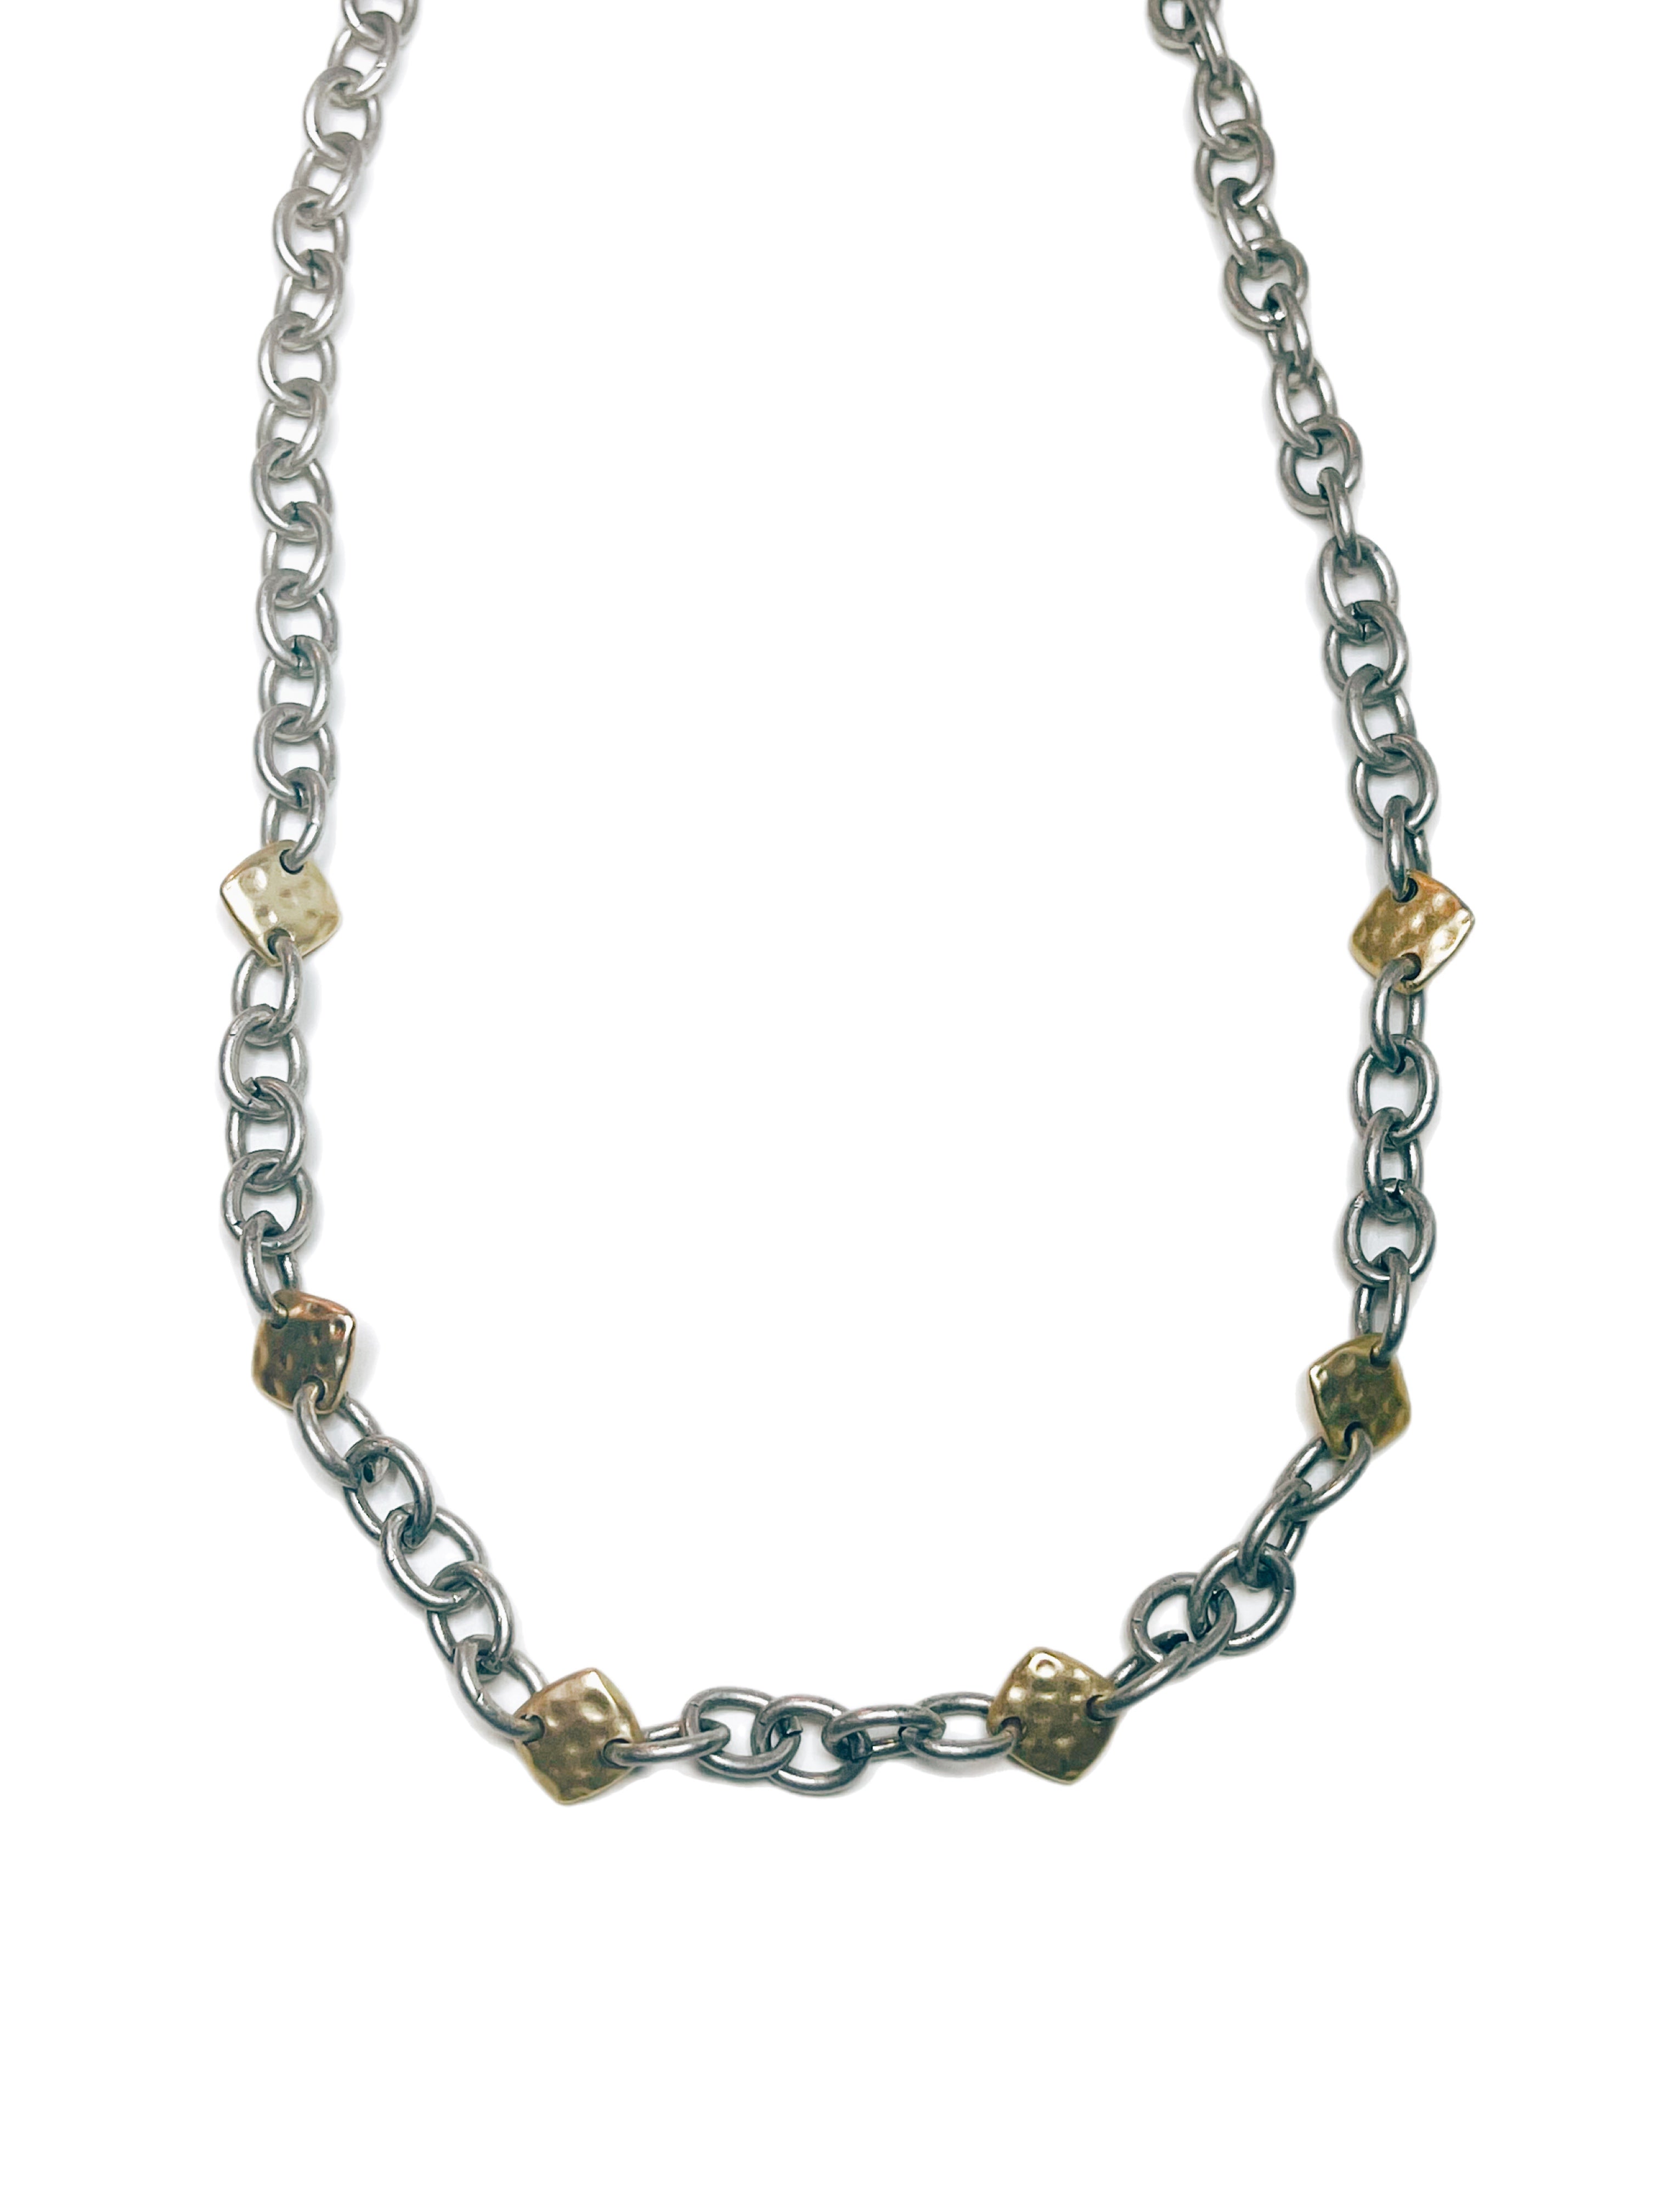 Macy - Combo necklace of chain and textured square connectors